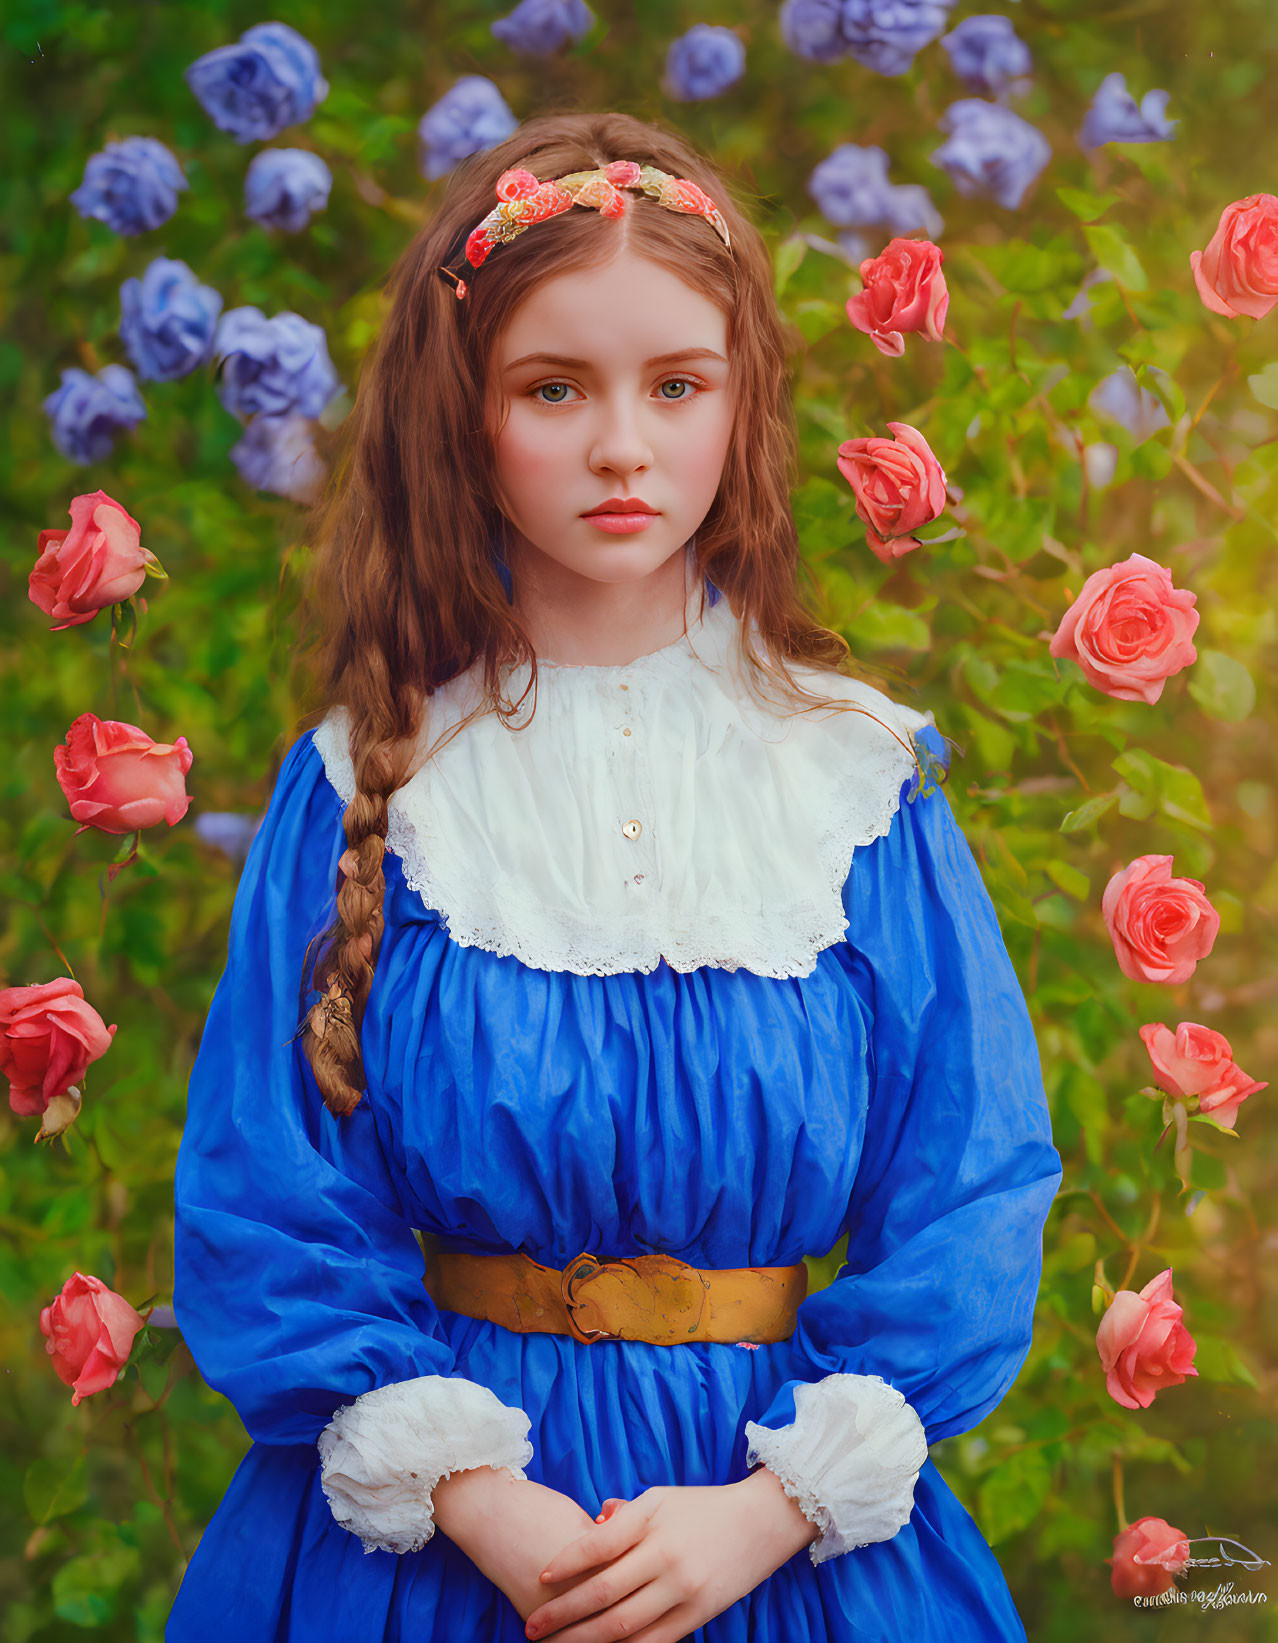 Young girl with braided hairstyle in vintage blue dress among colorful flowers